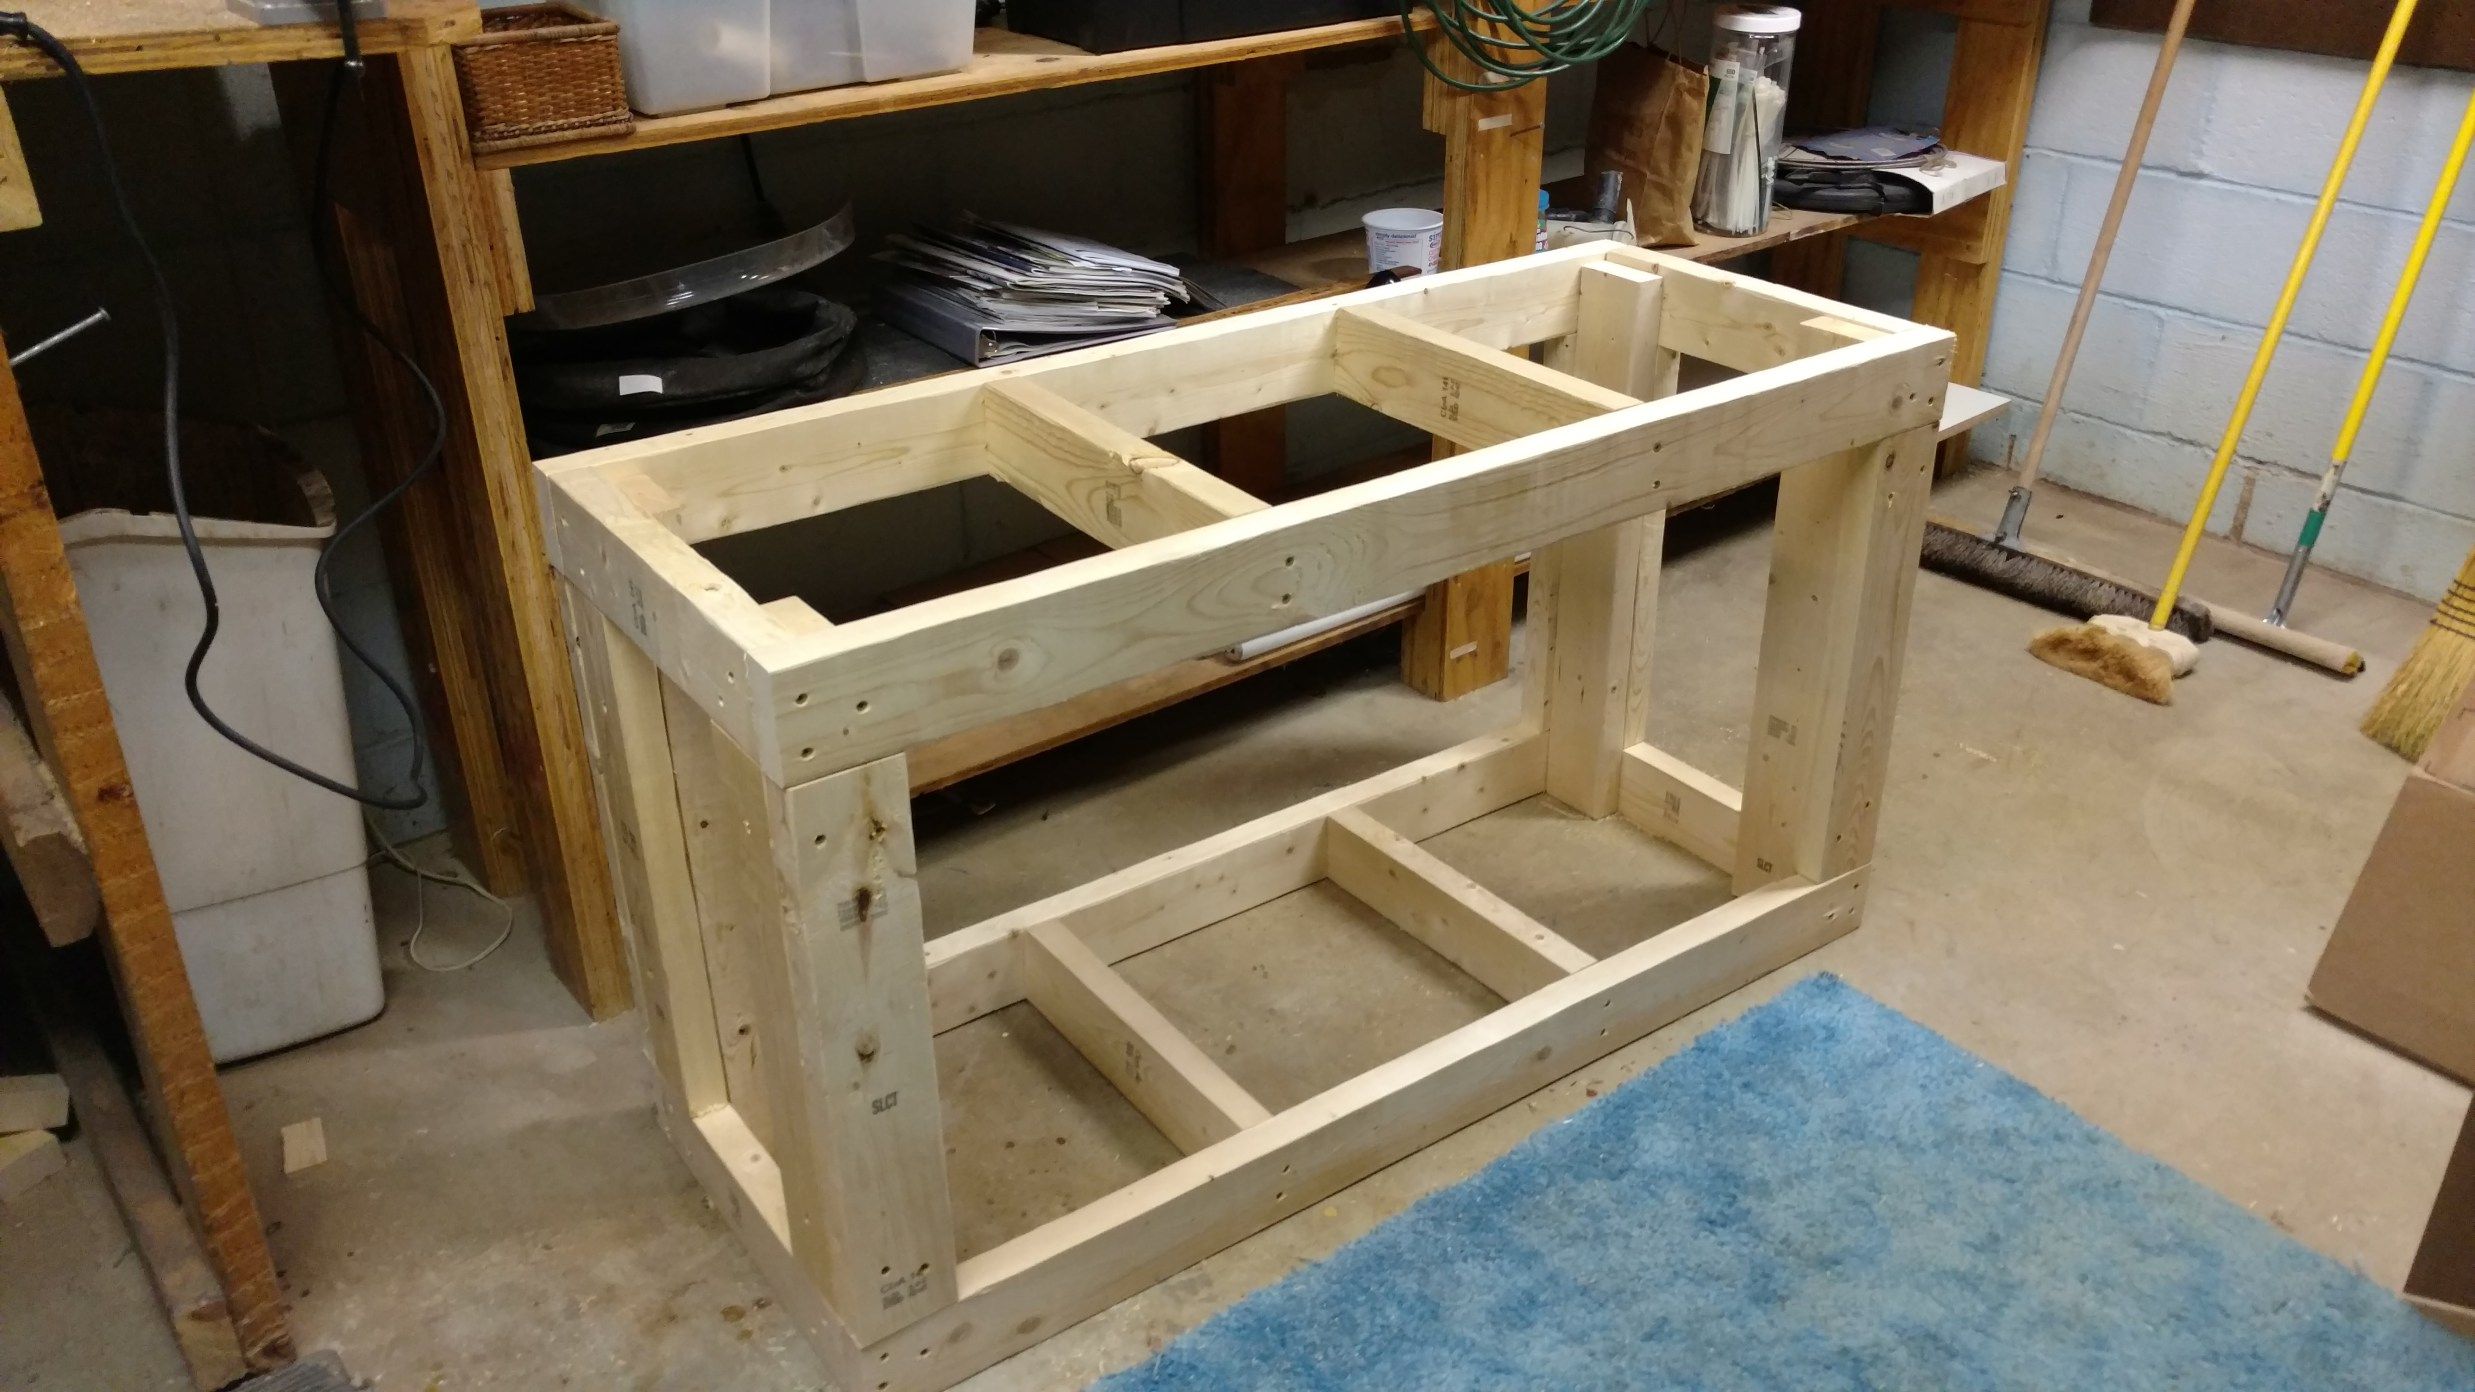 How do you make a fish tank stand Cabinet?